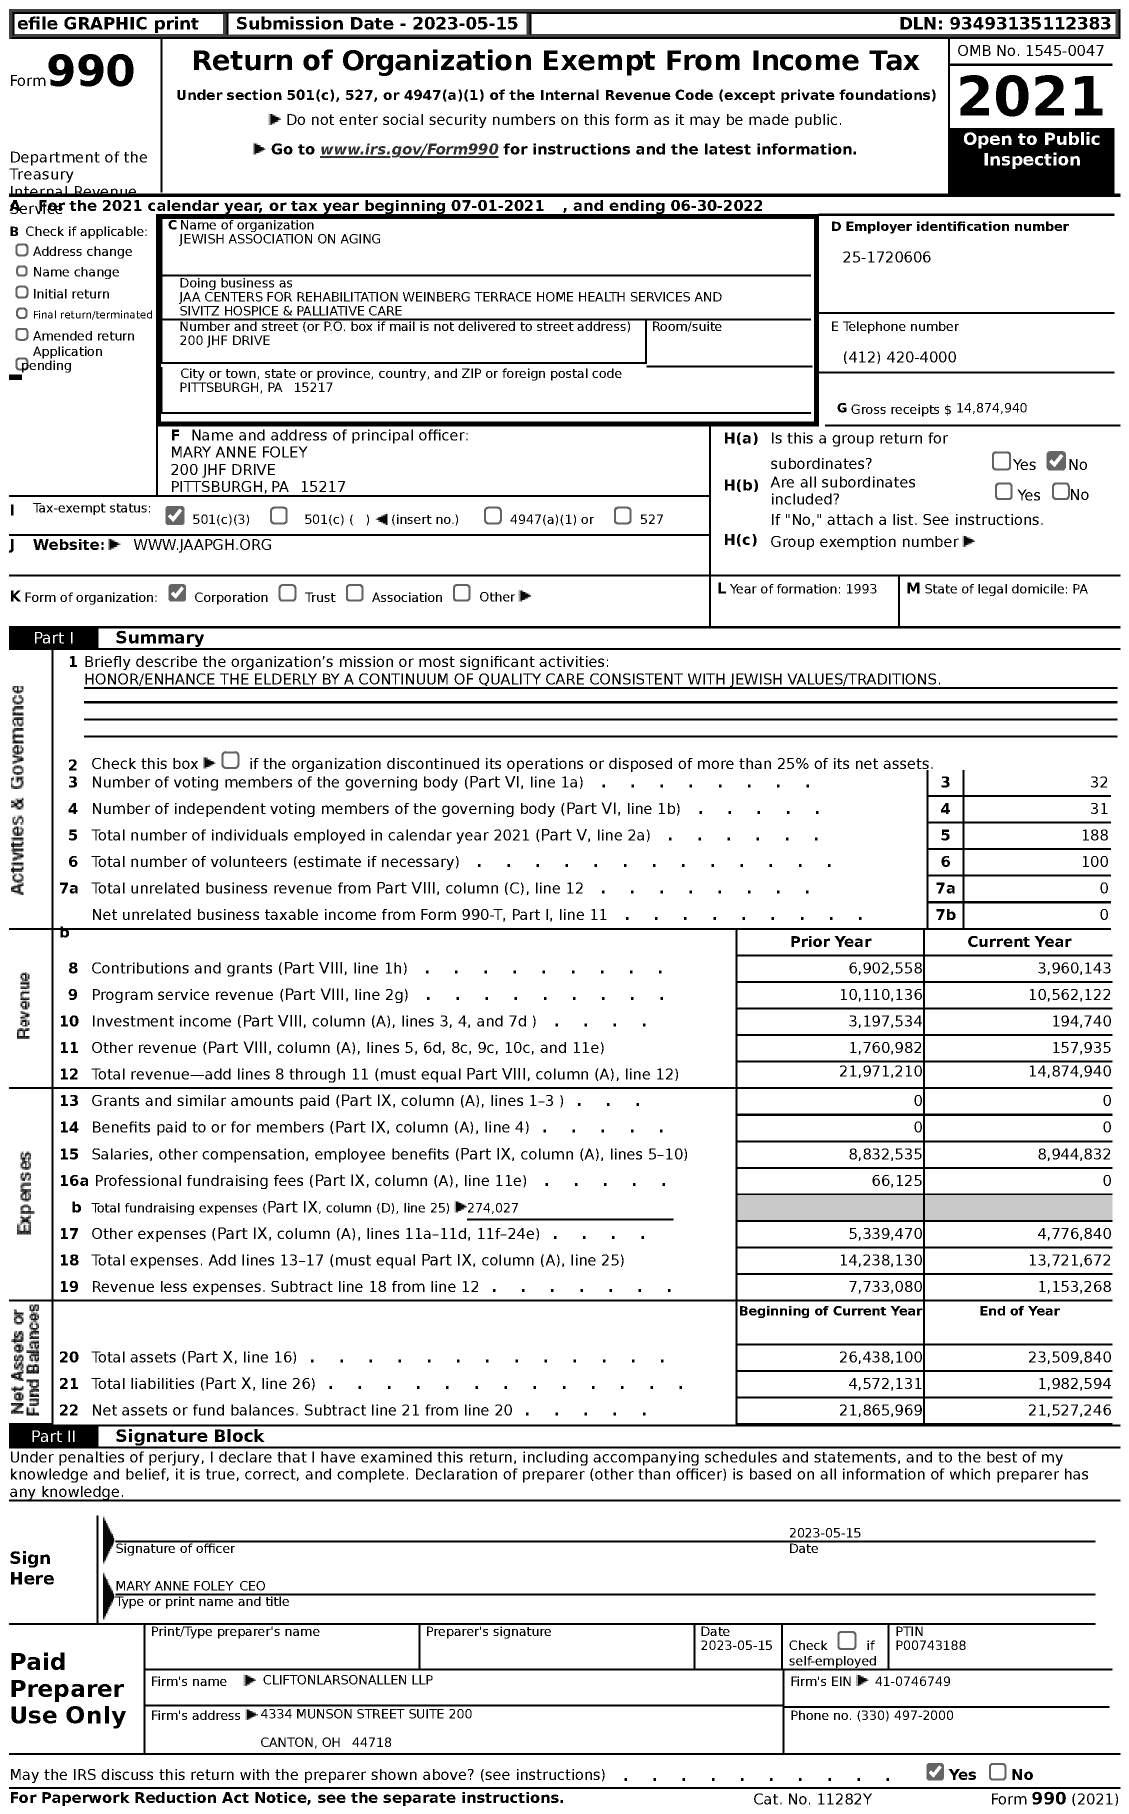 Image of first page of 2021 Form 990 for Jaa Centers for Rehabilitation Weinberg Terrace Home Health Services and Sivitz Hospice and Palliative Care (JAA)